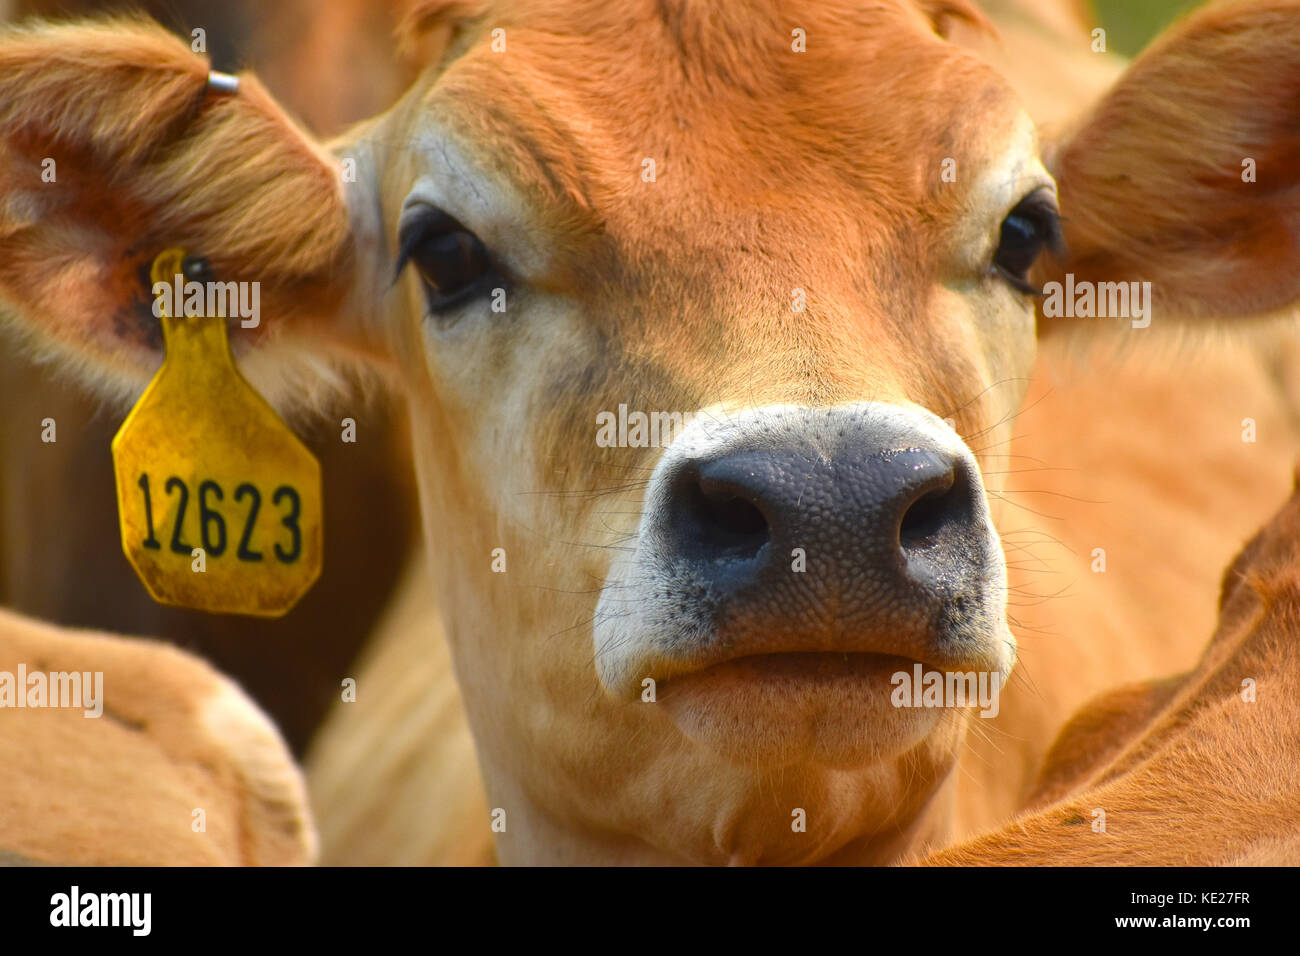 Cow closeup with identification tags in the ears. Stock Photo